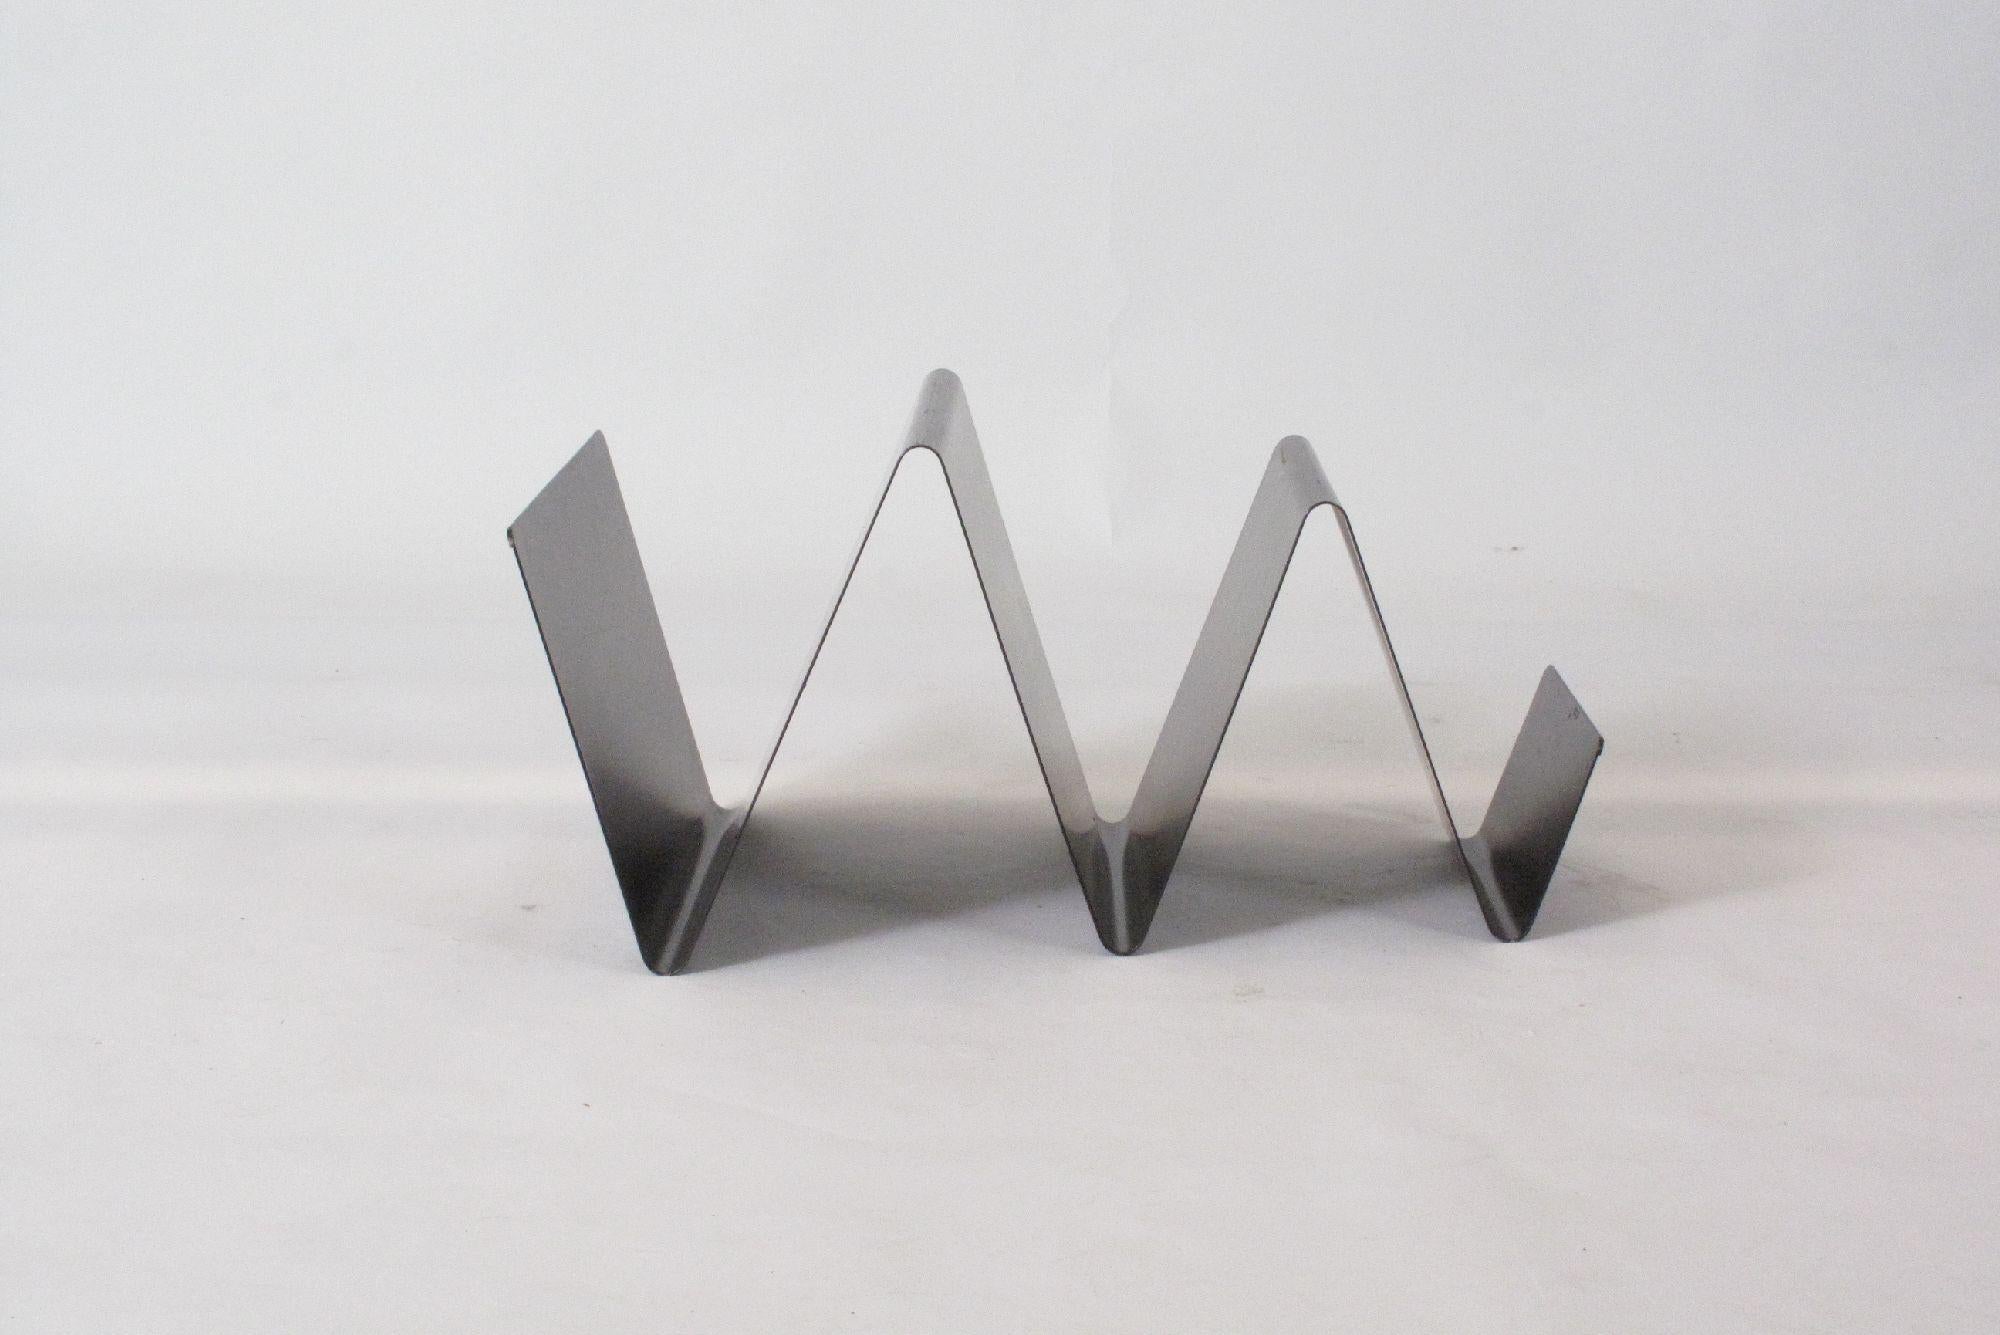 This magazine rack is surprisingly heavy in weight, which is a contrast to the functional  and graphical lines that this design shows.
In the 1980s a lot of designs were geometrically shaped or designed in a very minimalistic way, inspired by the